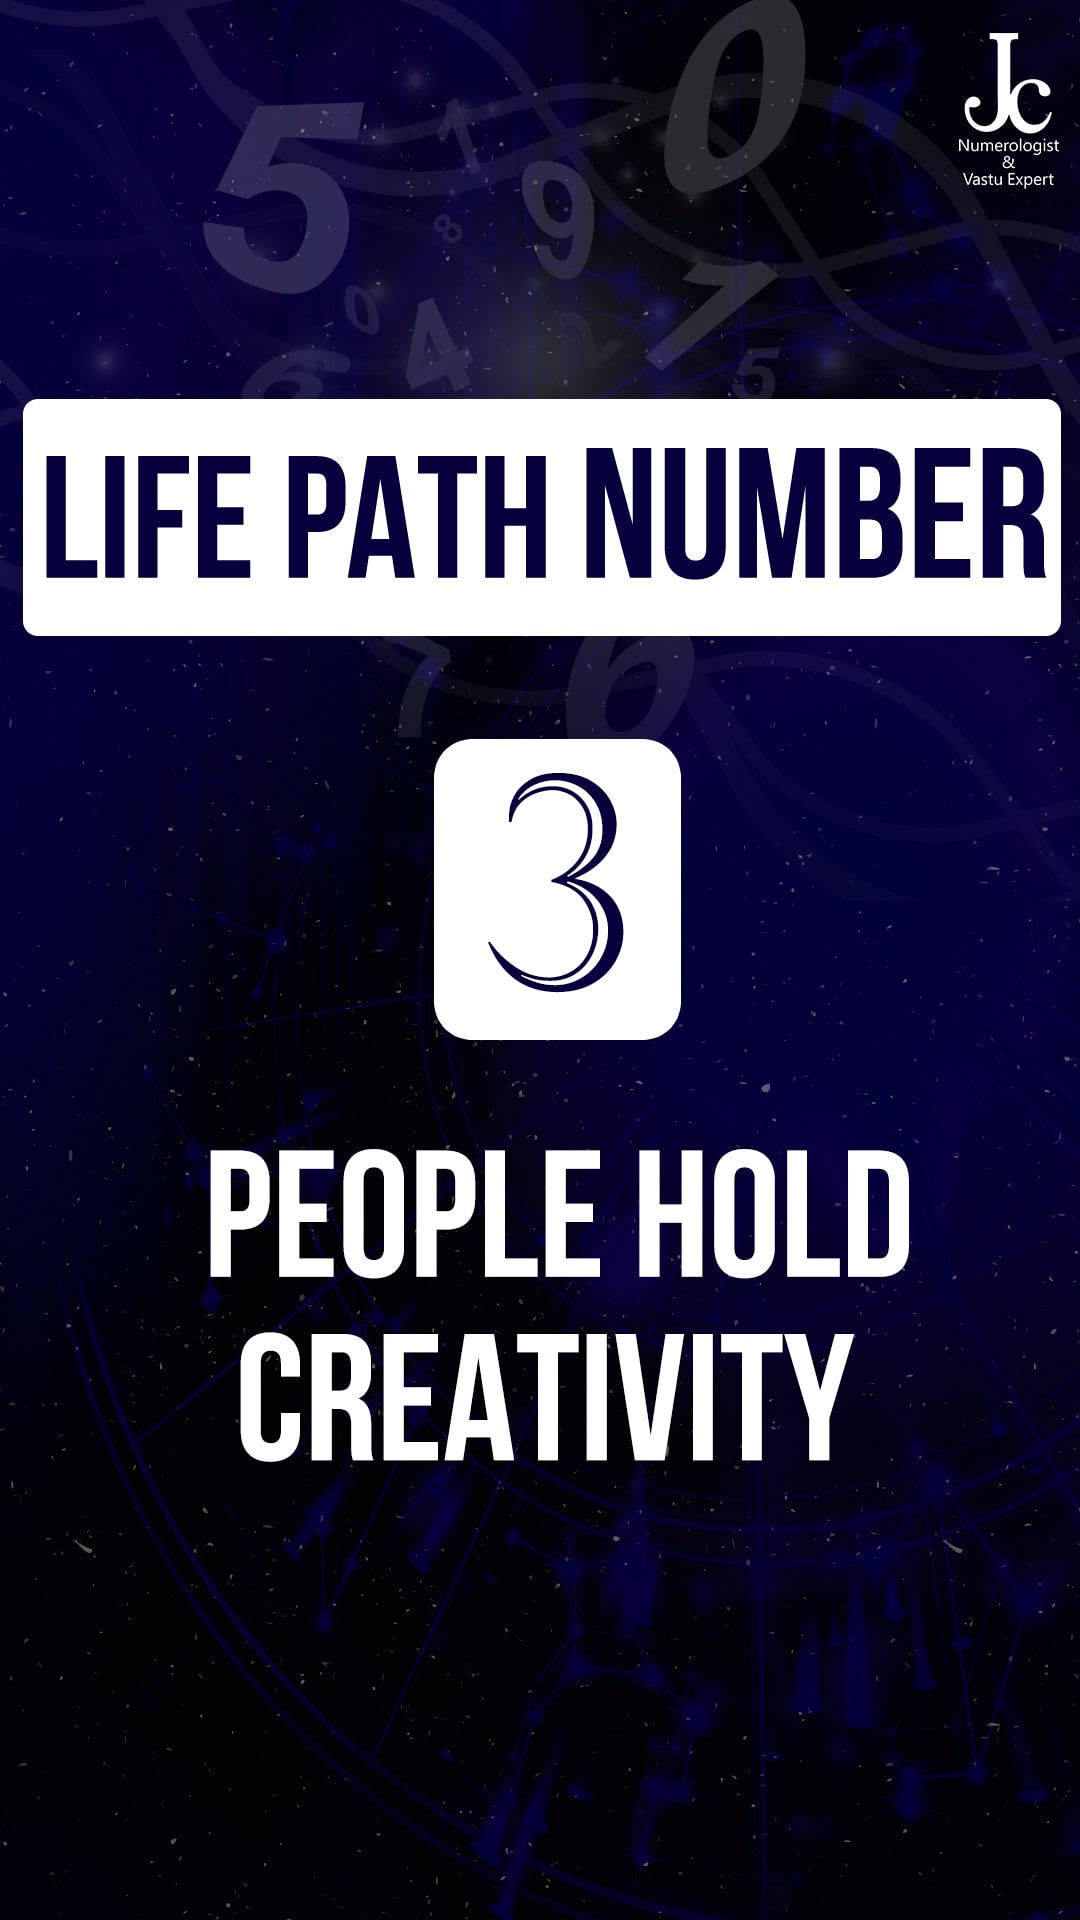 Life Path Number 3 Meaning